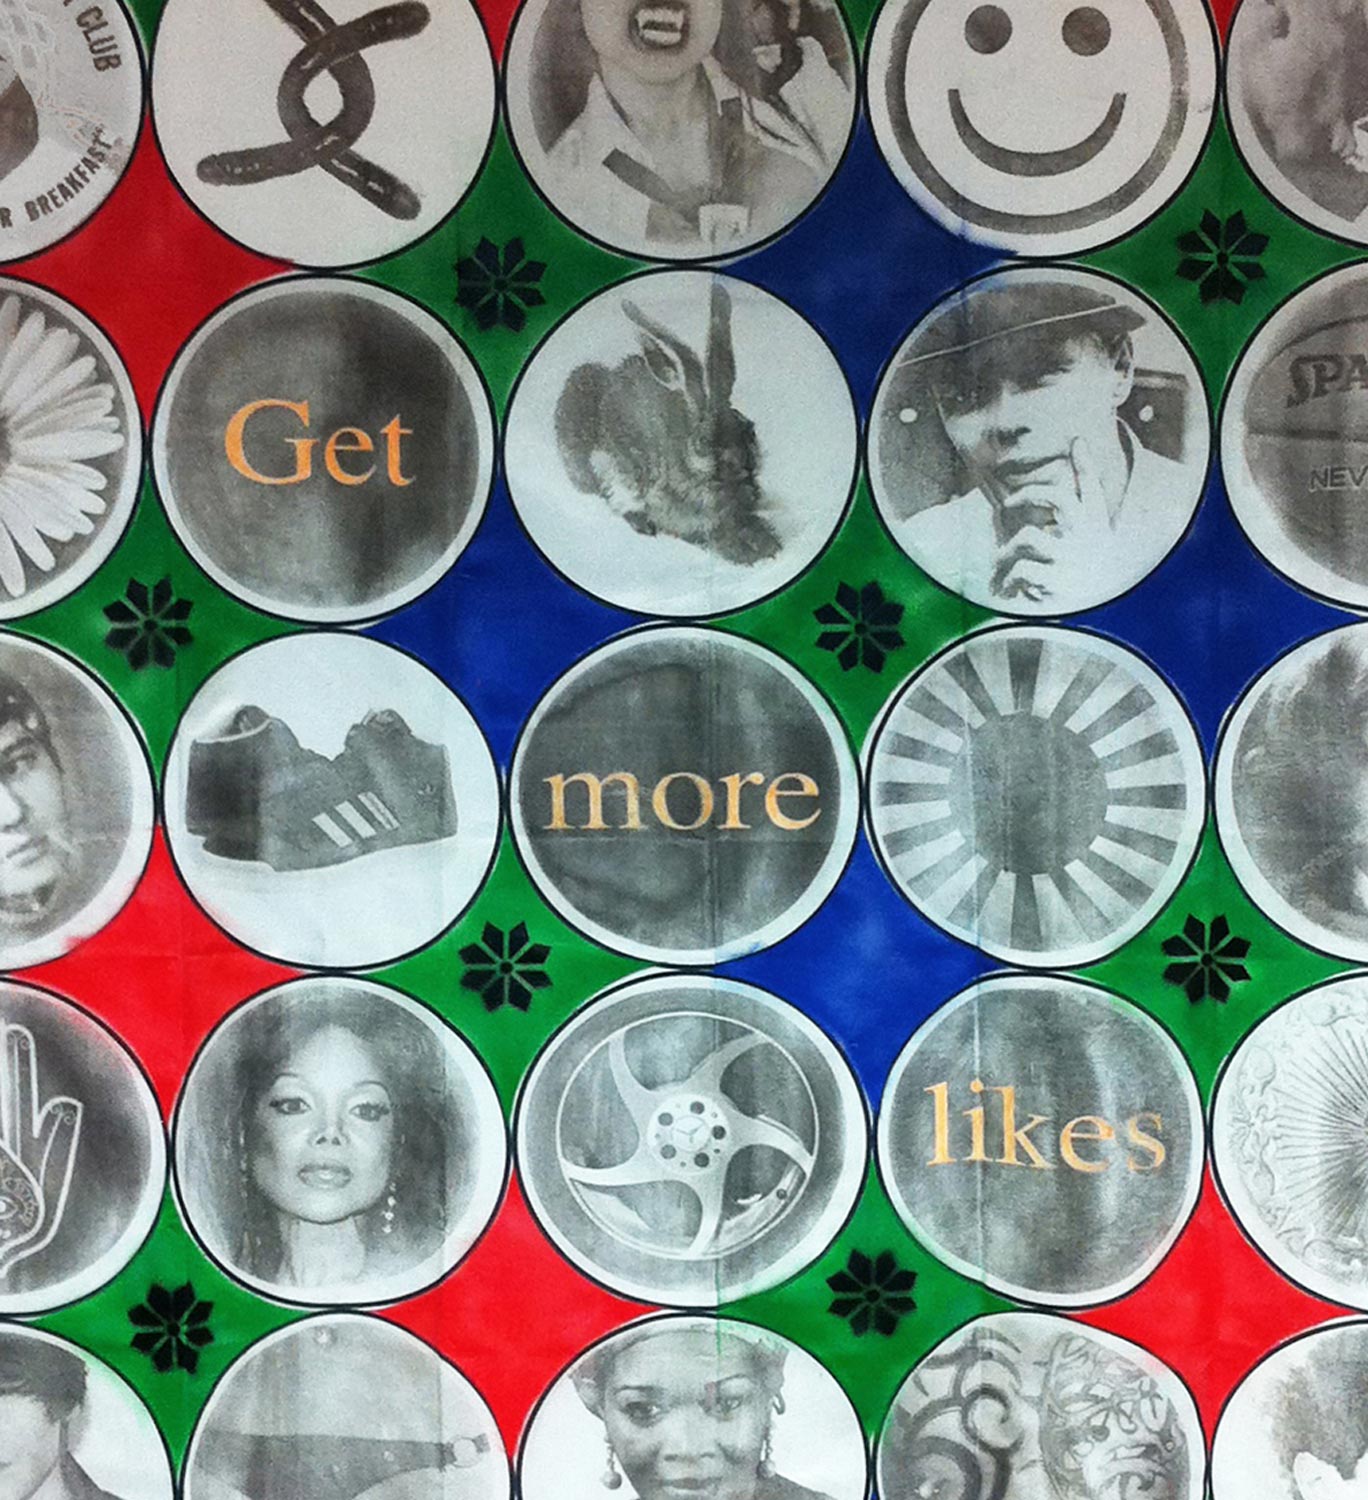 Get more likes (2013) CURTAIN BANNER